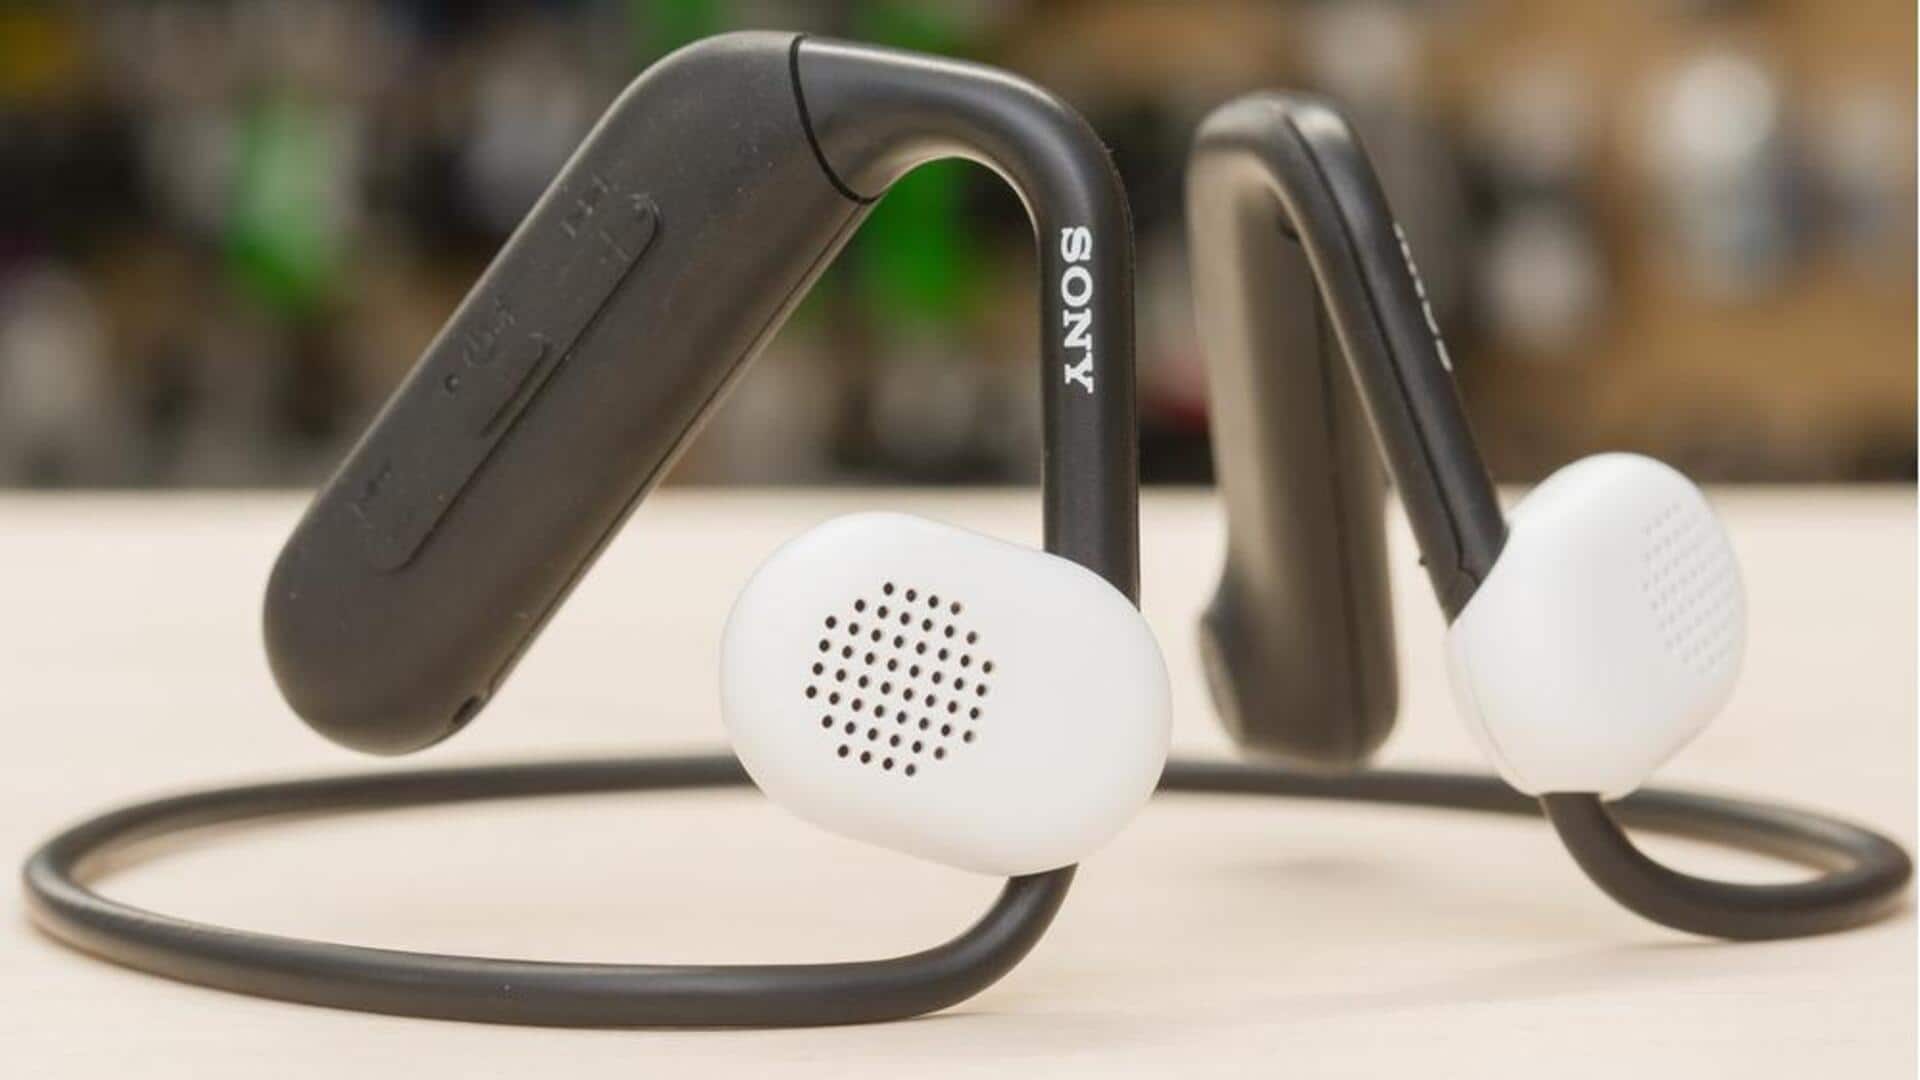 Sony launches Float Run sports headphones in India, priced at Rs 10,990 -  India Today